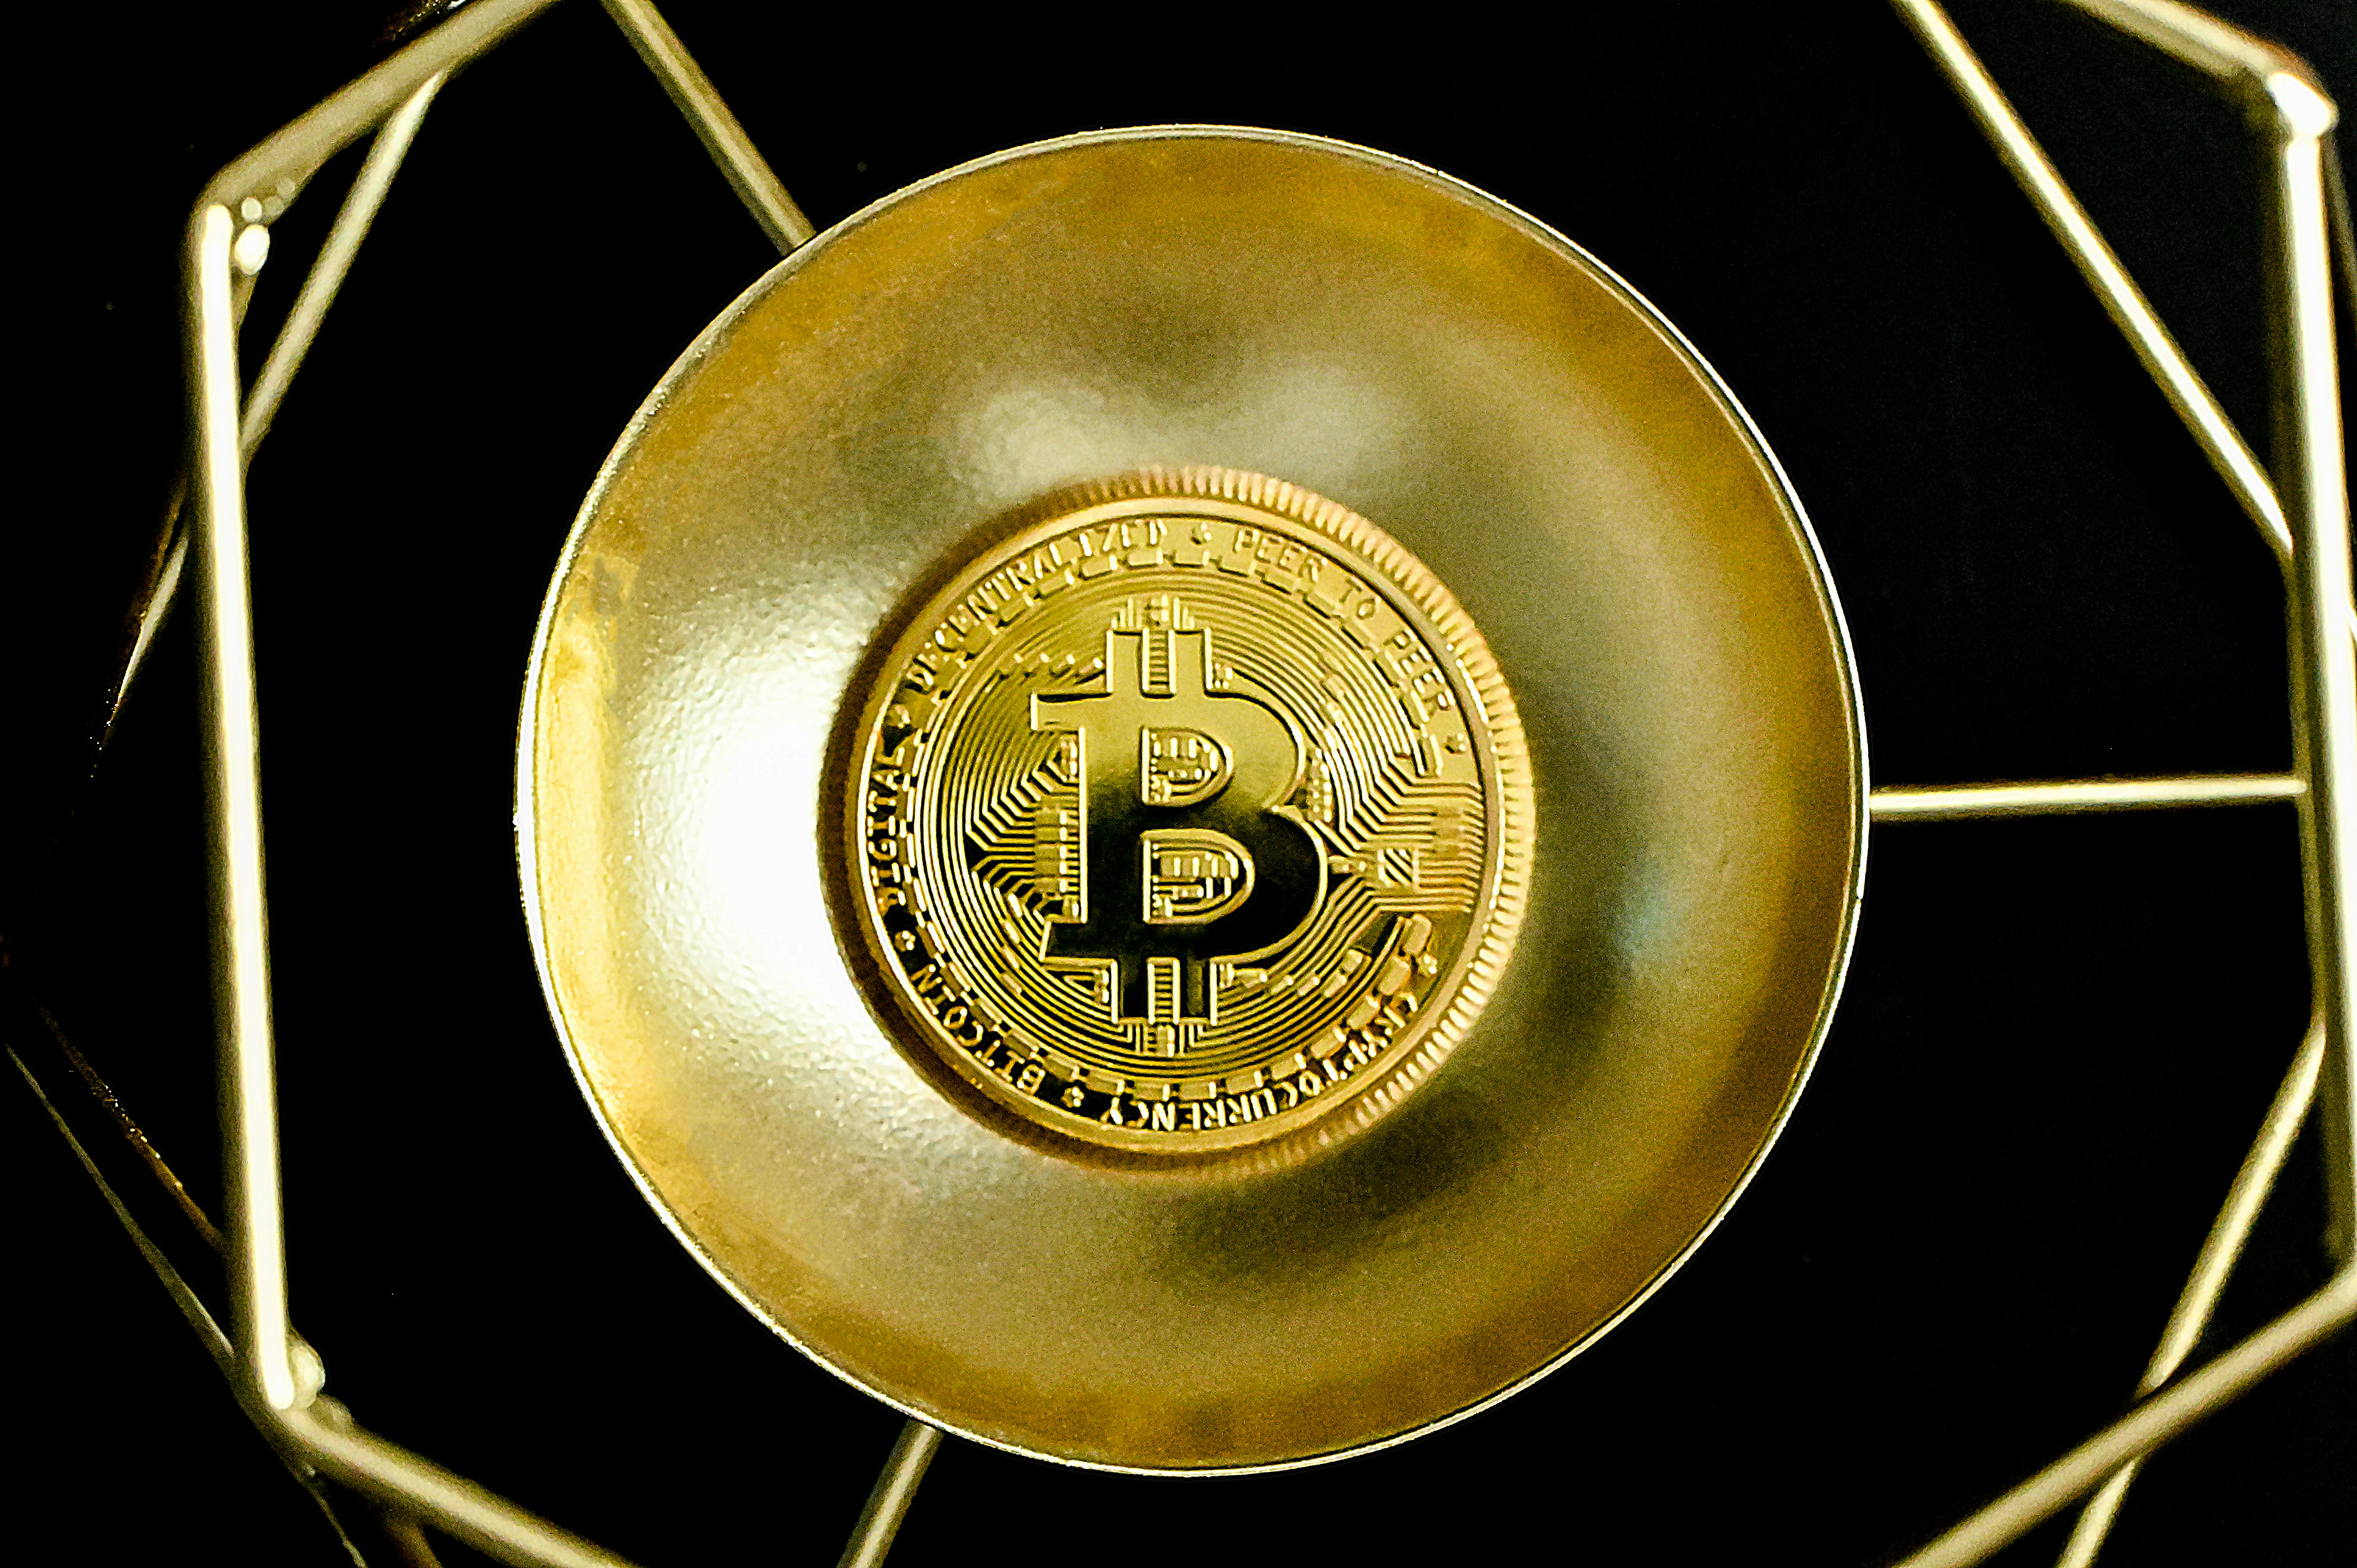 A single Bitcoin placed on a golden bowl